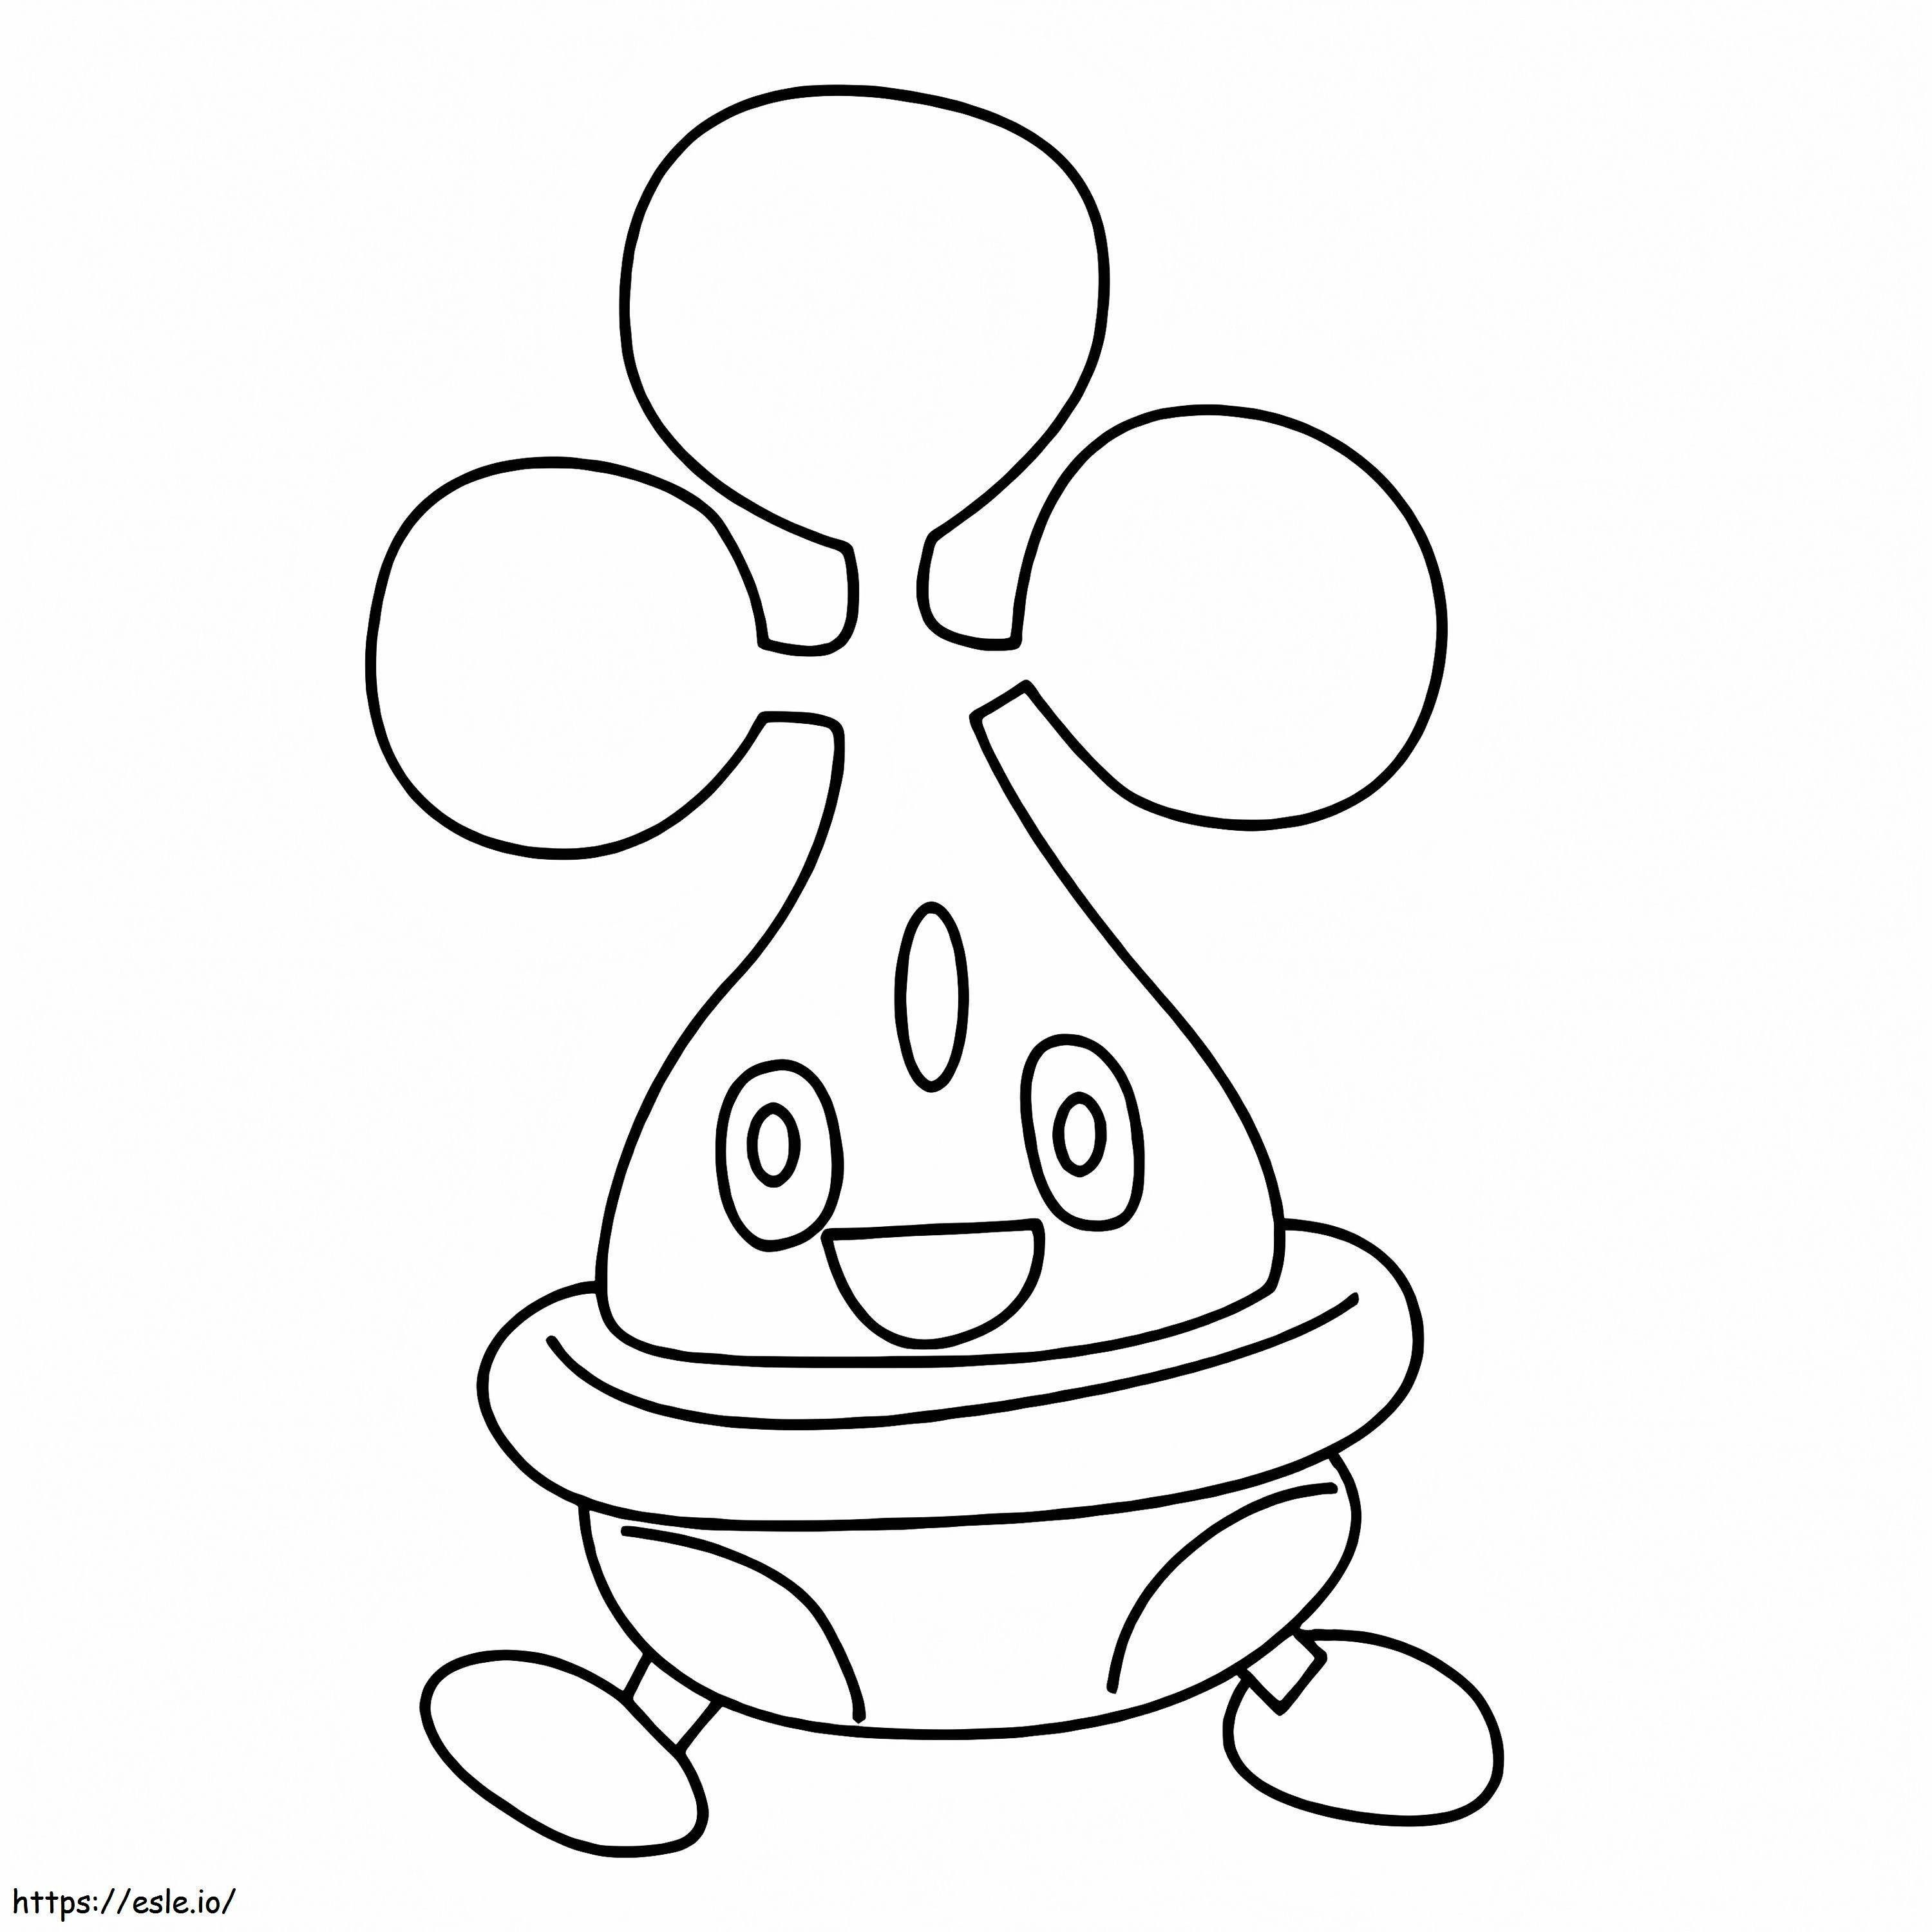 Bonsly Pokemon 1 coloring page